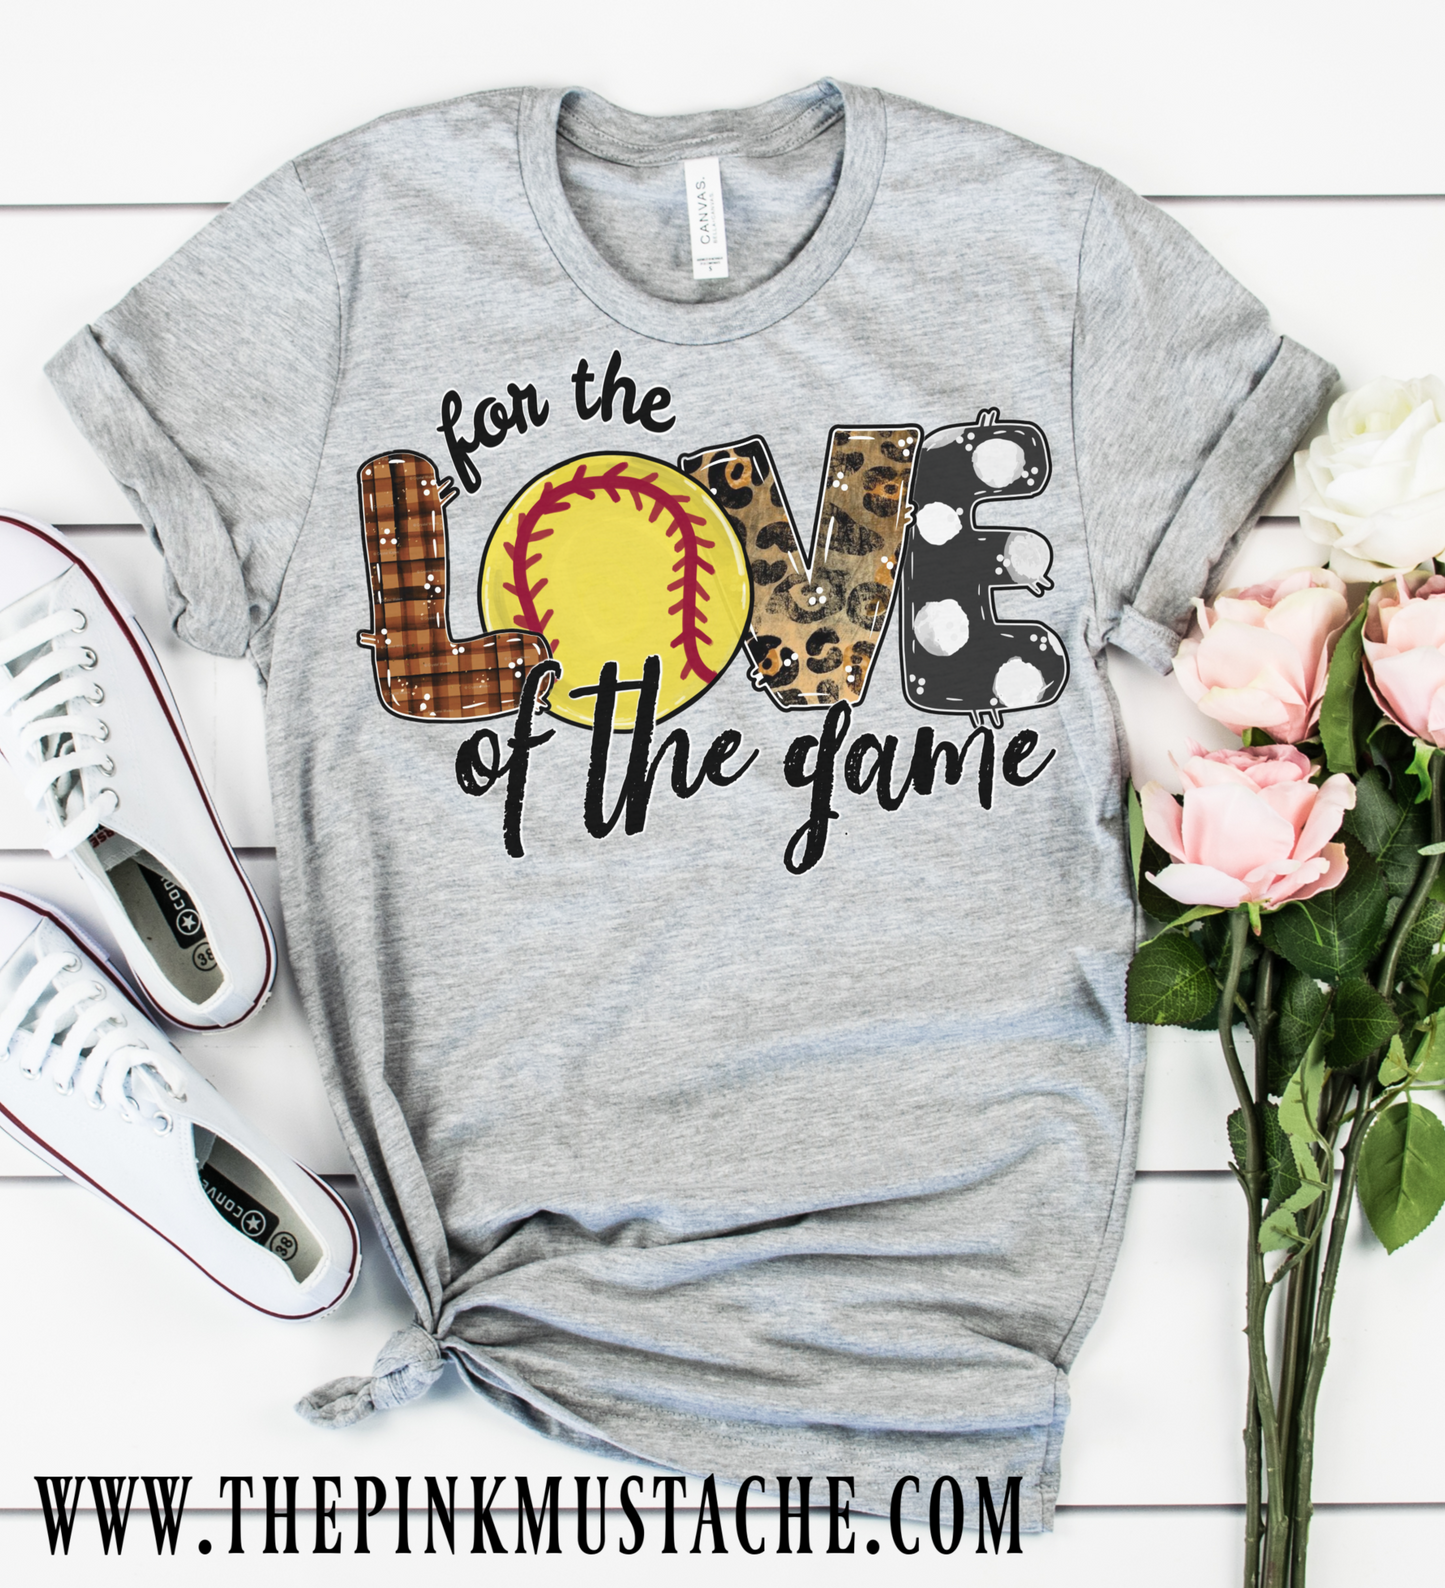 Hand Painted Design Softball For The Love Of The Game T-Shirt / Softball Mom Tee/ T-Ball Shirt/ Gifts For Her/ SALE / Softball Fan T-Shirt